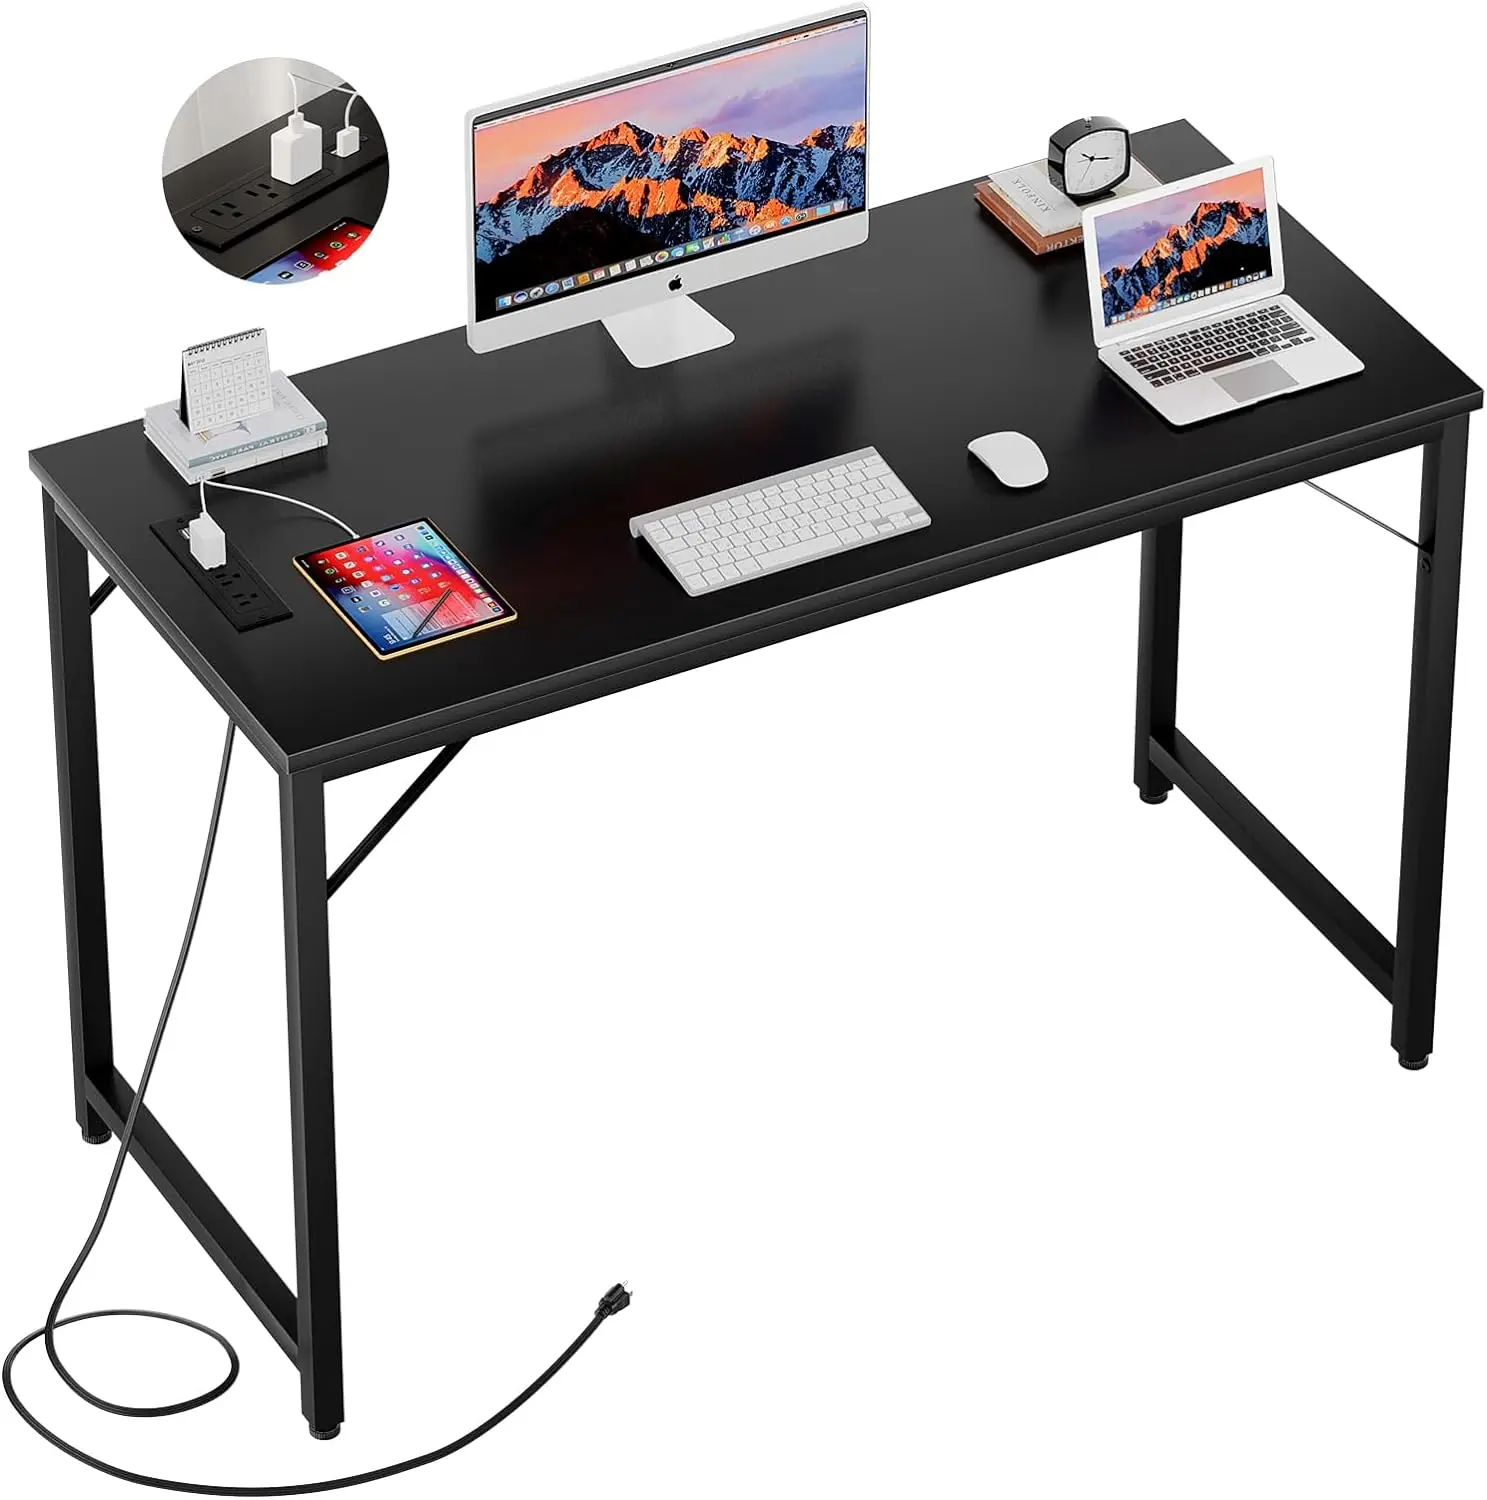 47 Inch Computer Desk with Magic Power Outlets, Modern Office Desk with USB Charging Ports, Sturdy Student Writing Desk